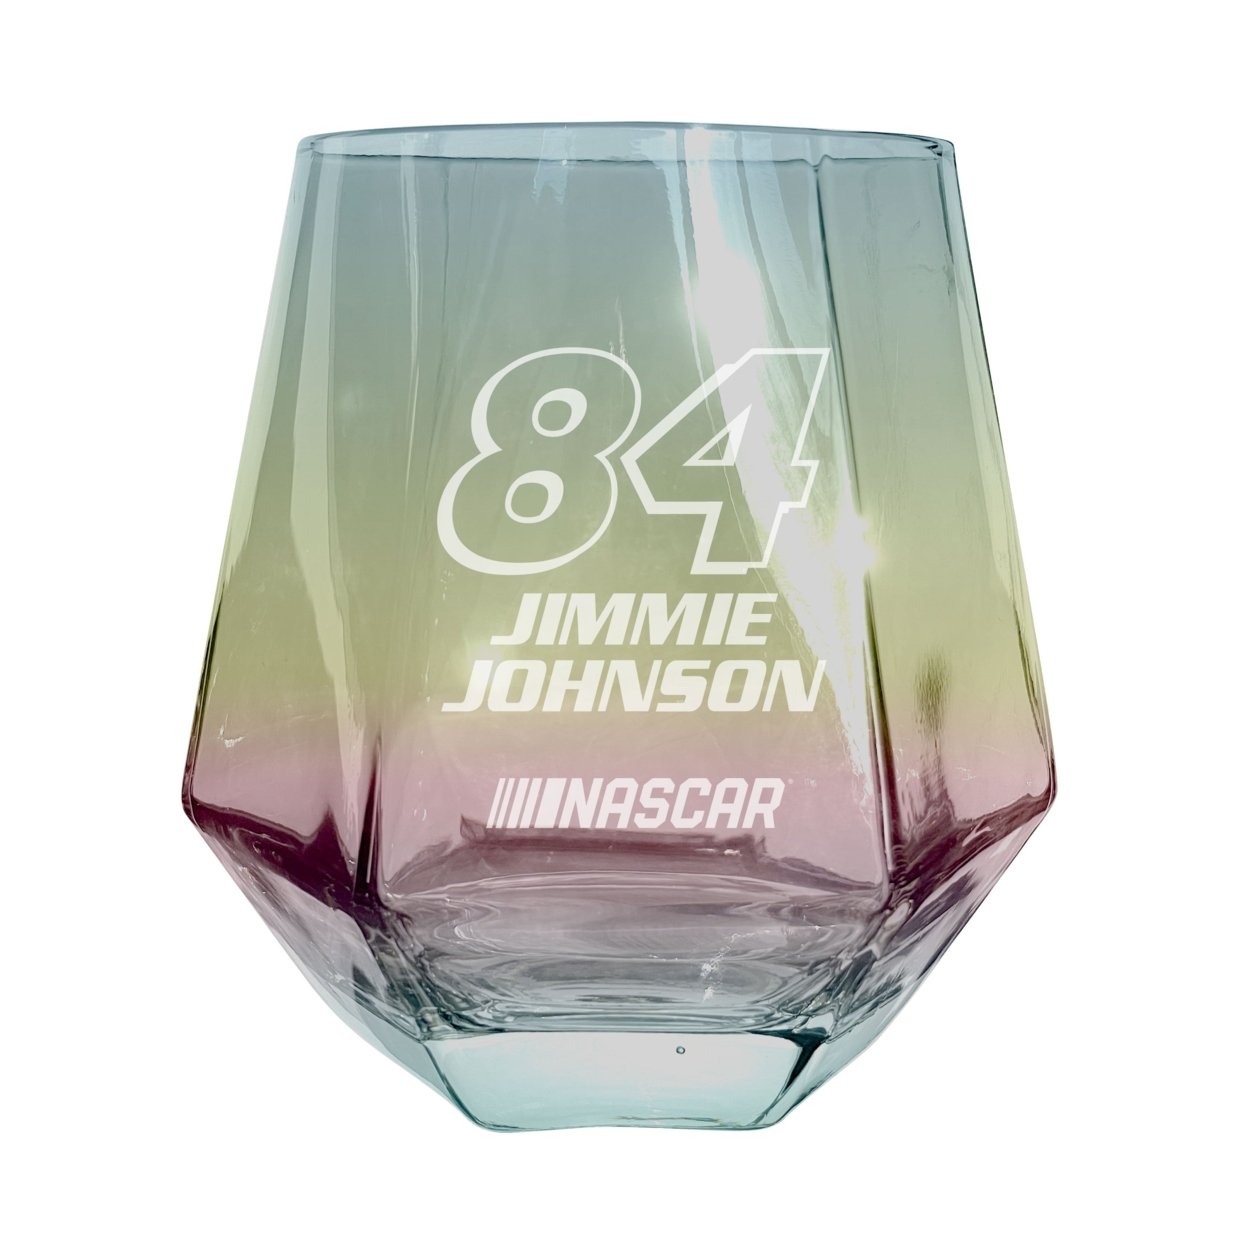 #84 Jimmie Johnson Officially Licensed 10 Oz Engraved Diamond Wine Glass - Iridescent, 2-Pack